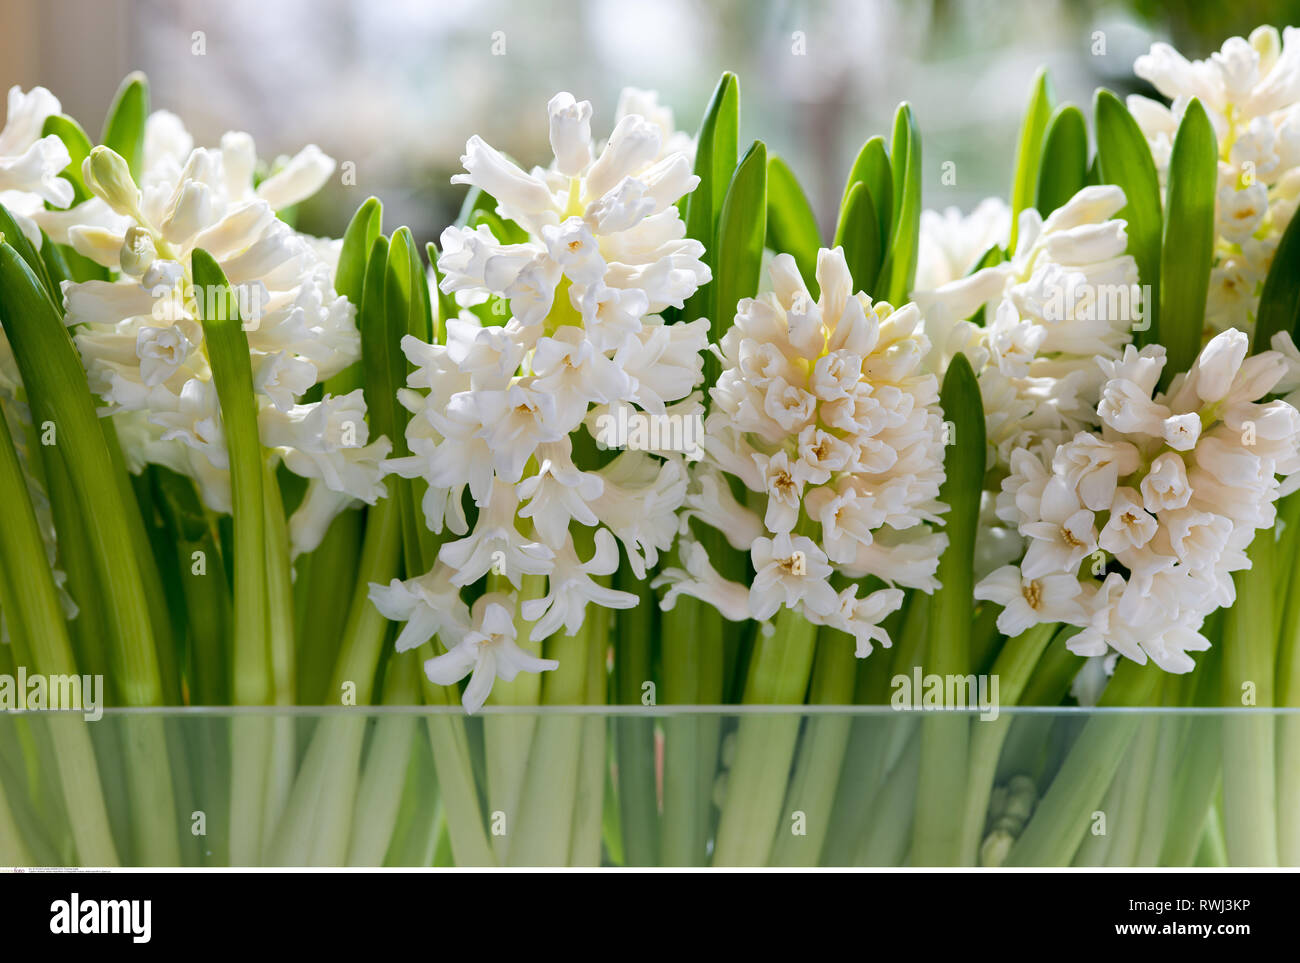 botany, white hyacinth in glass jar, Caution! For Greetingcard-Use / Postcard-Use In German Speaking Countries Certain Restrictions May Apply Stock Photo